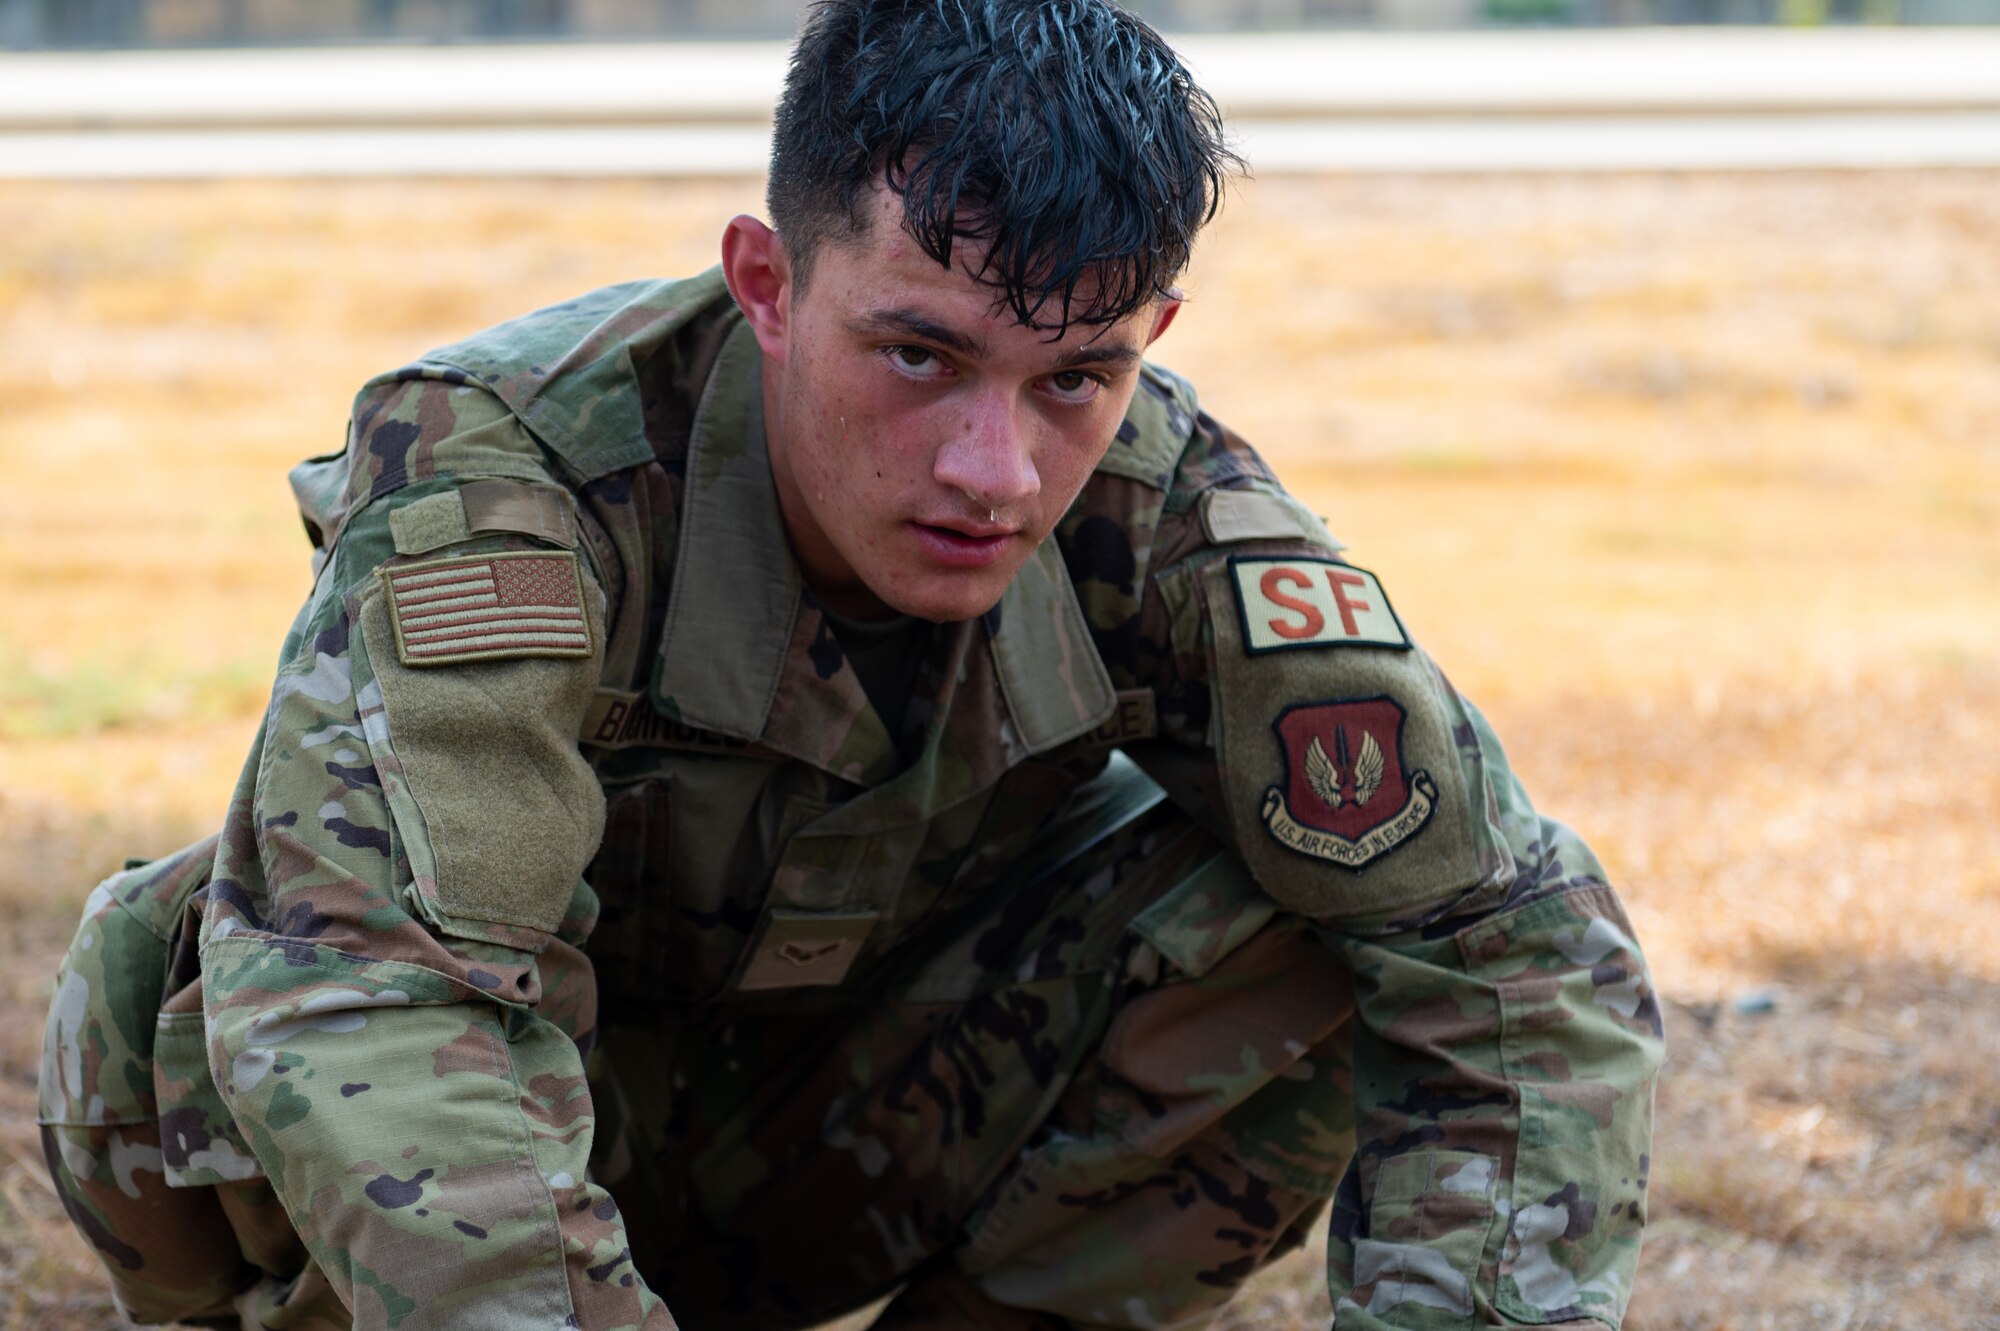 An Airman crouching to catch his breath.